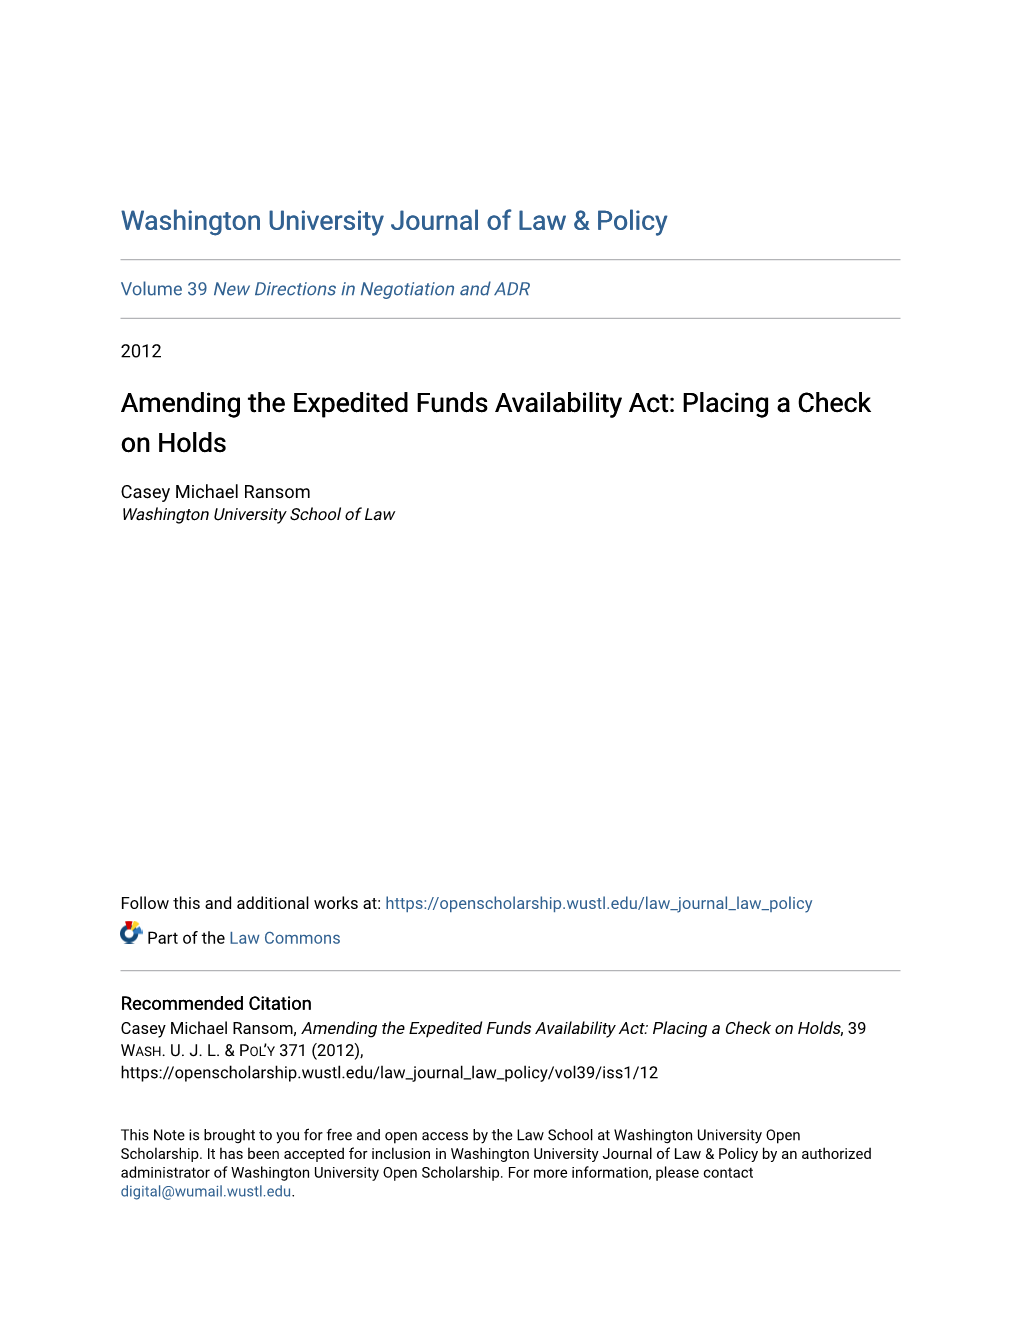 Amending the Expedited Funds Availability Act: Placing a Check on Holds